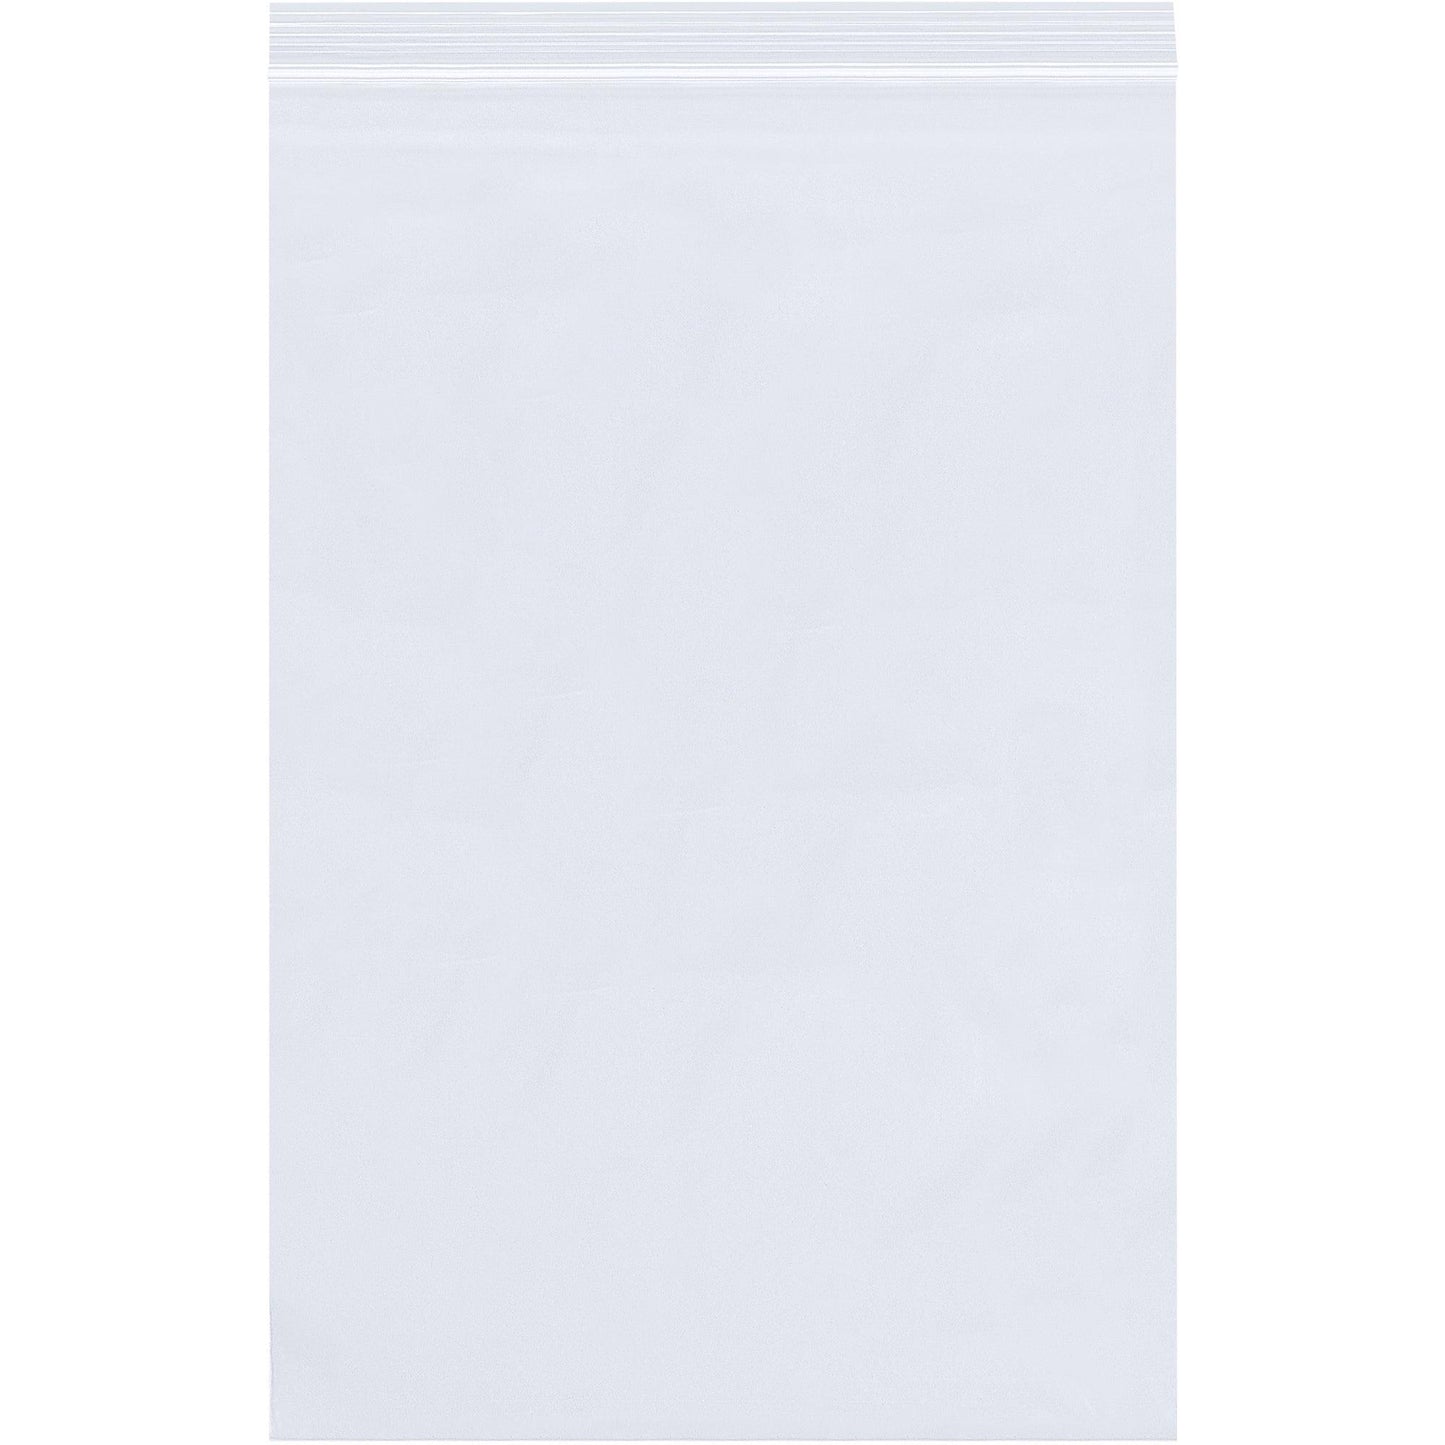 20 x 20" - 2 Mil Reclosable Poly Bags - PB3688